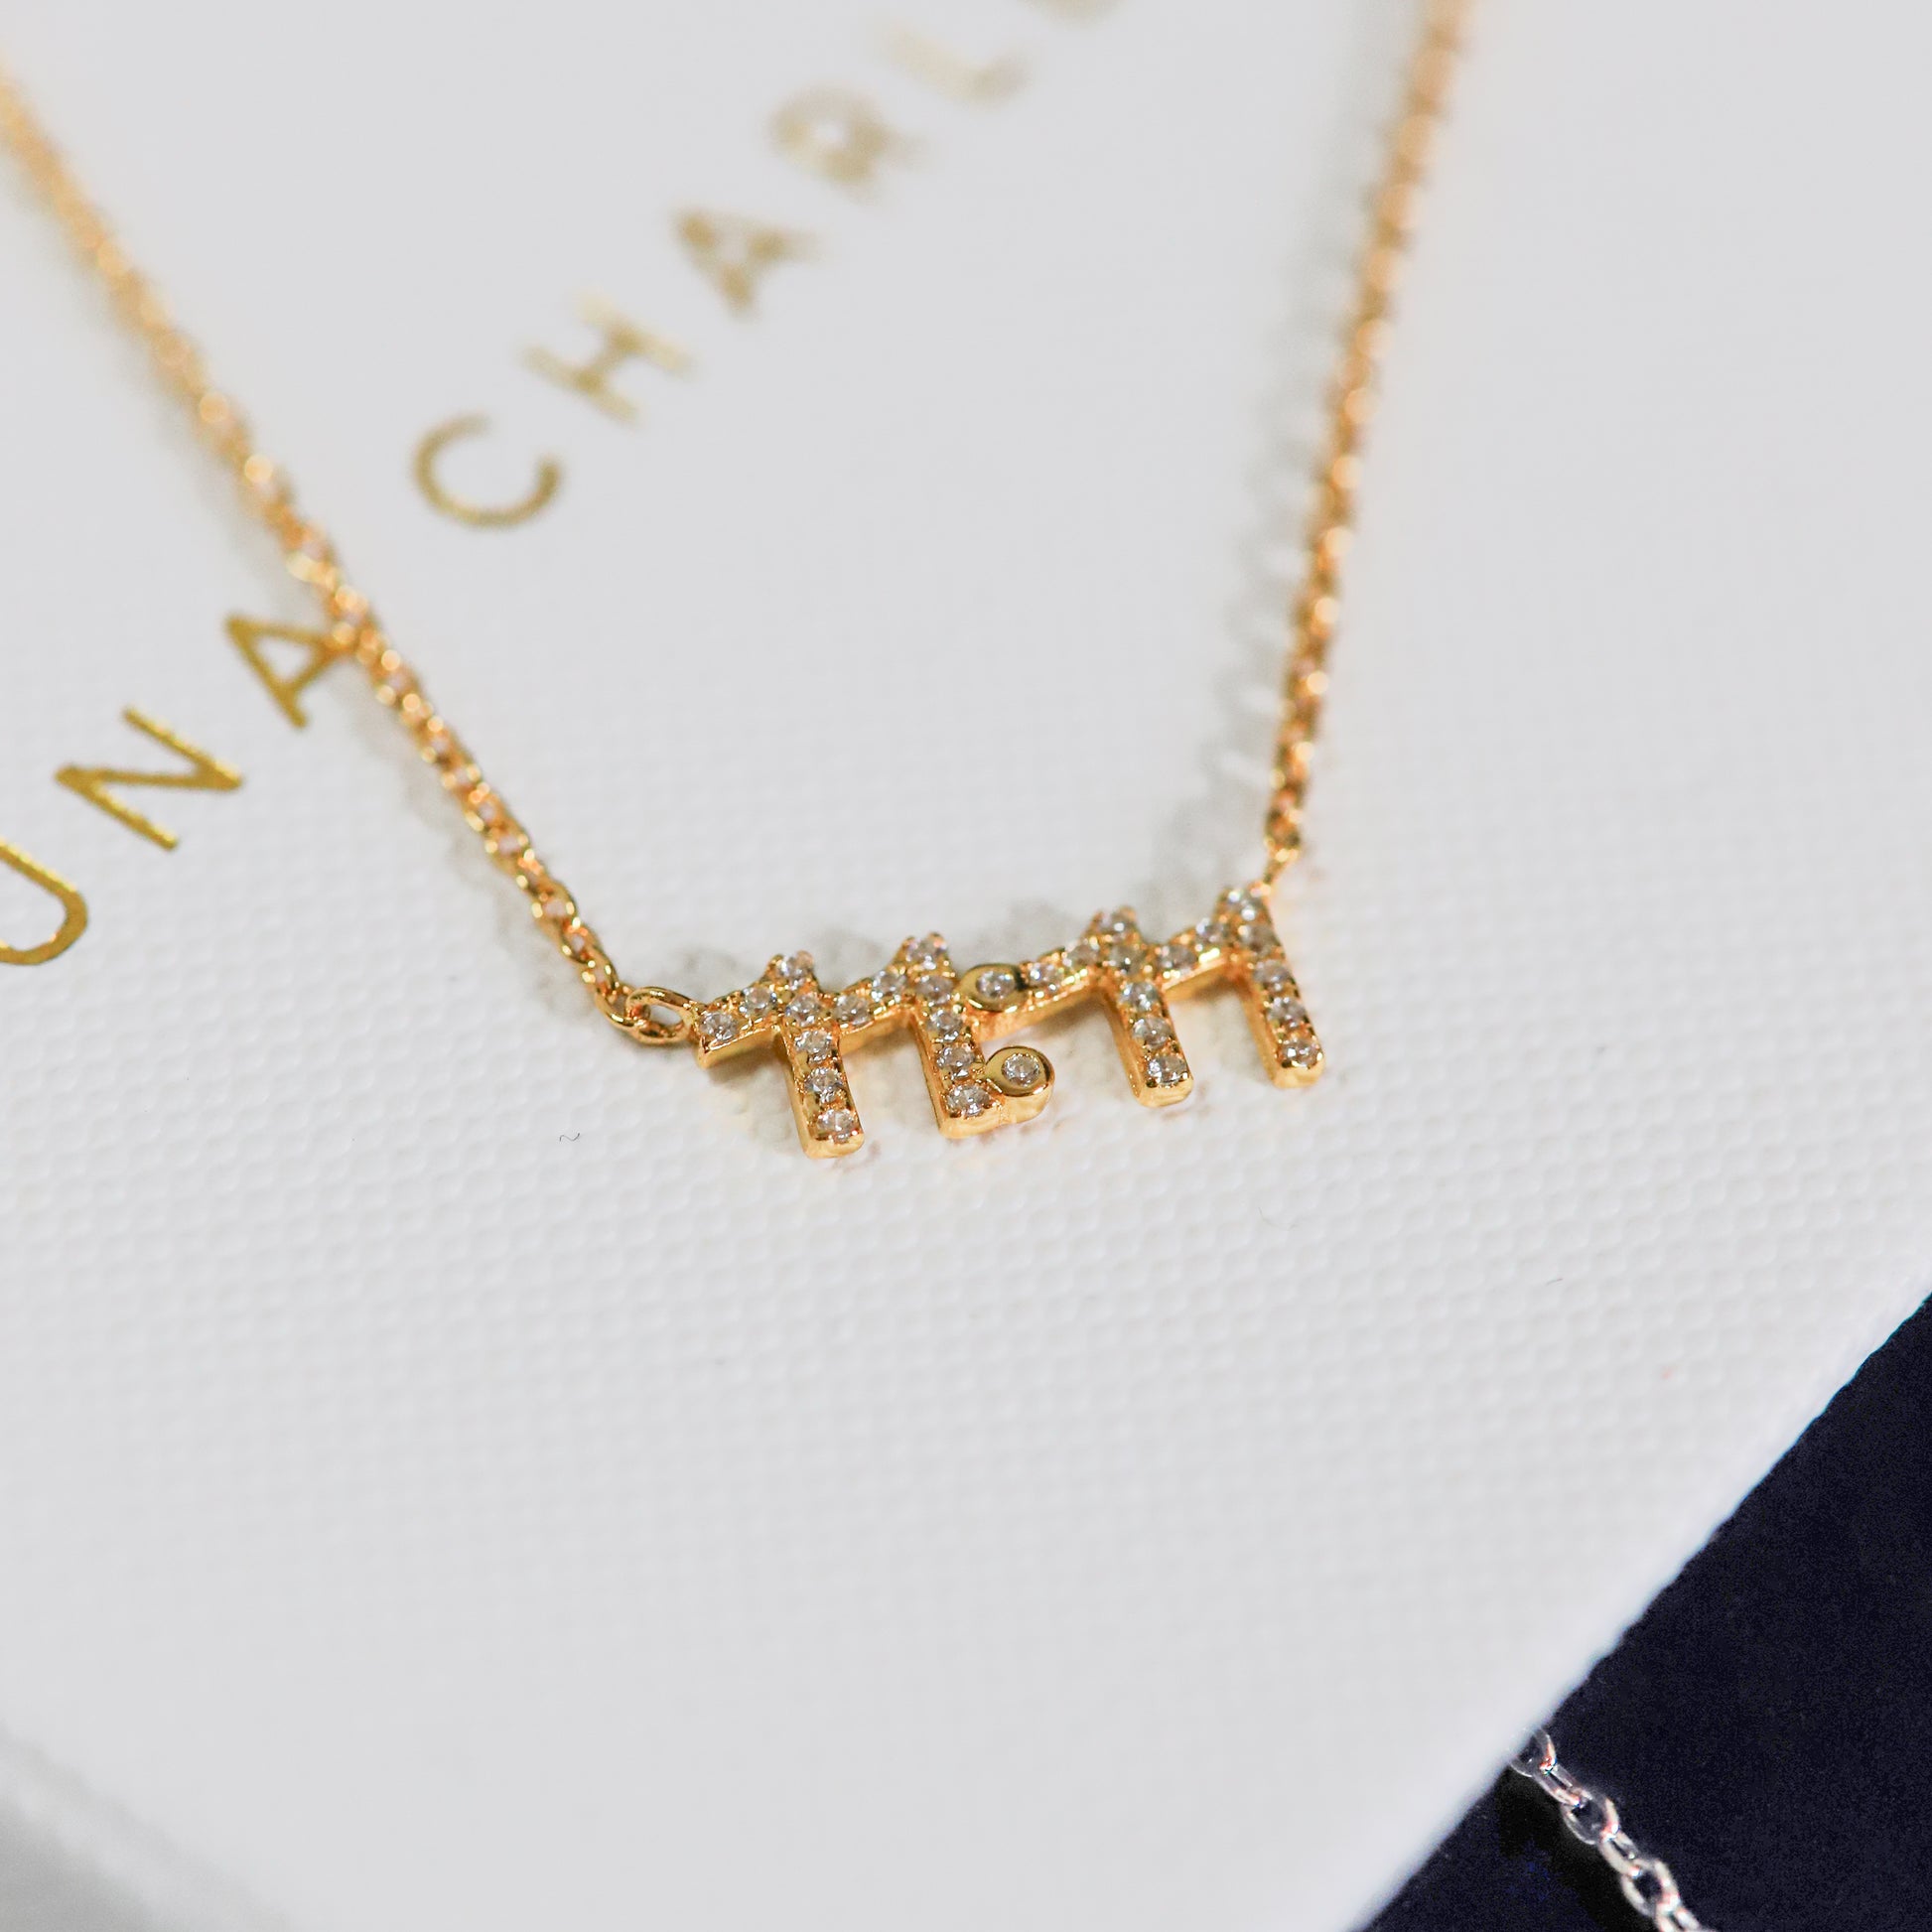 Ezra 11:11 Necklace | 14k Gold Plated